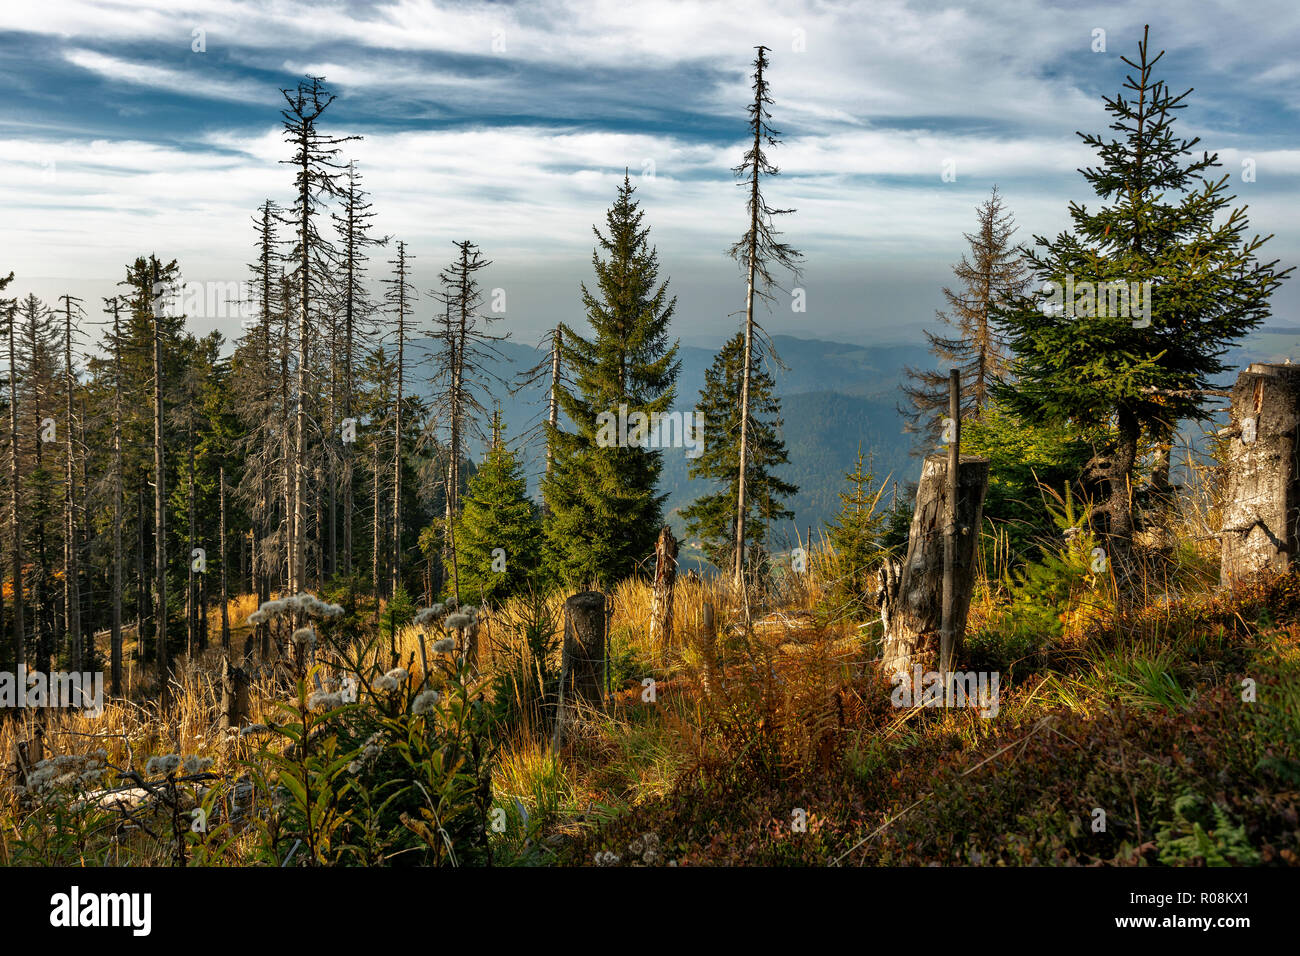 Dead Spruces (Picea), protected forest, Belchen, Black Forest, Baden-Württemberg, Germany Stock Photo